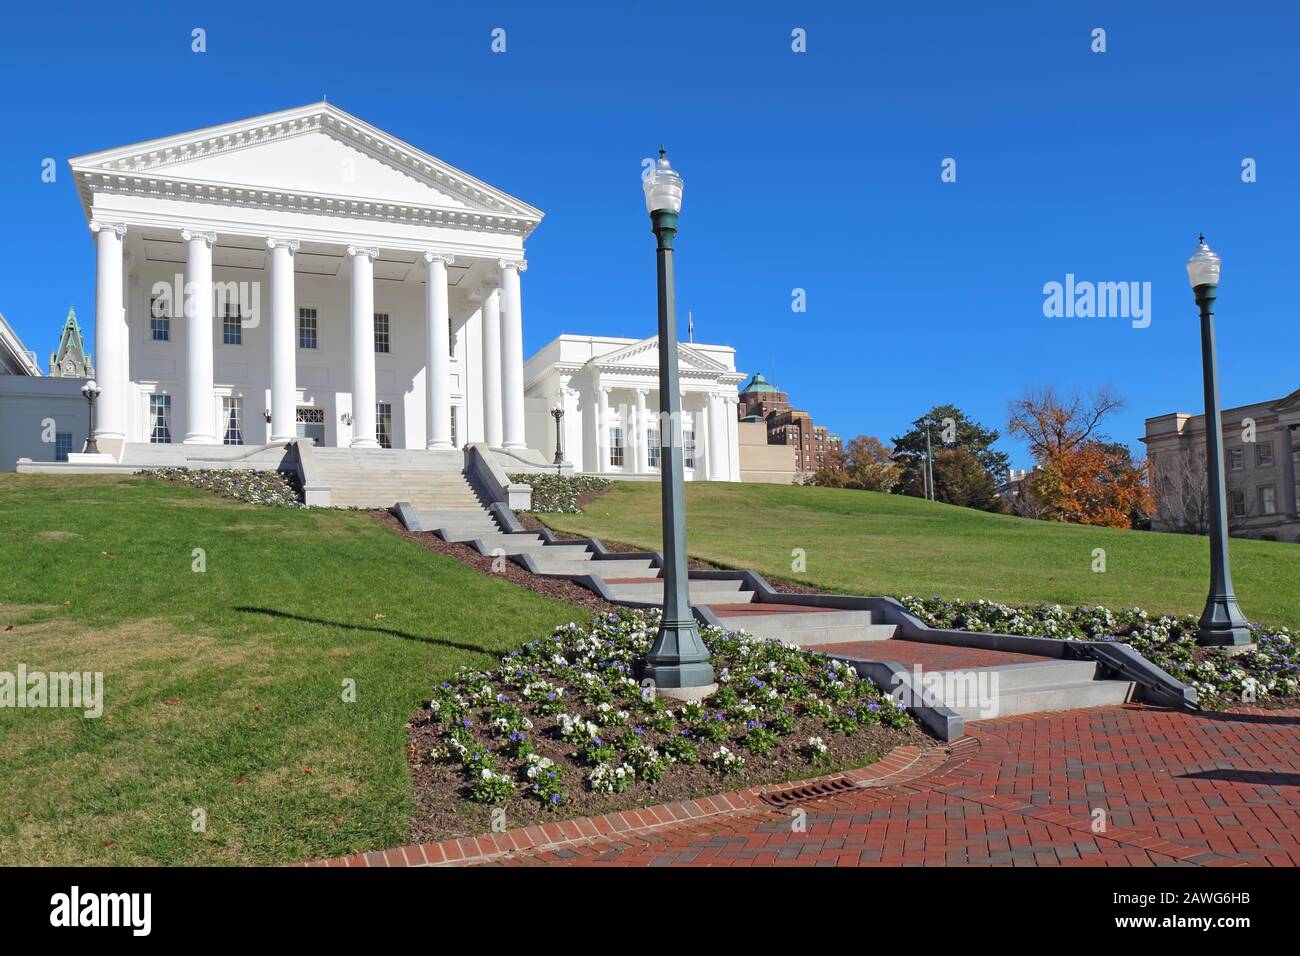 Front facade and walkway to the neoclassical style Virginia State Capitol building in Richmond against a bright blue sky Stock Photo